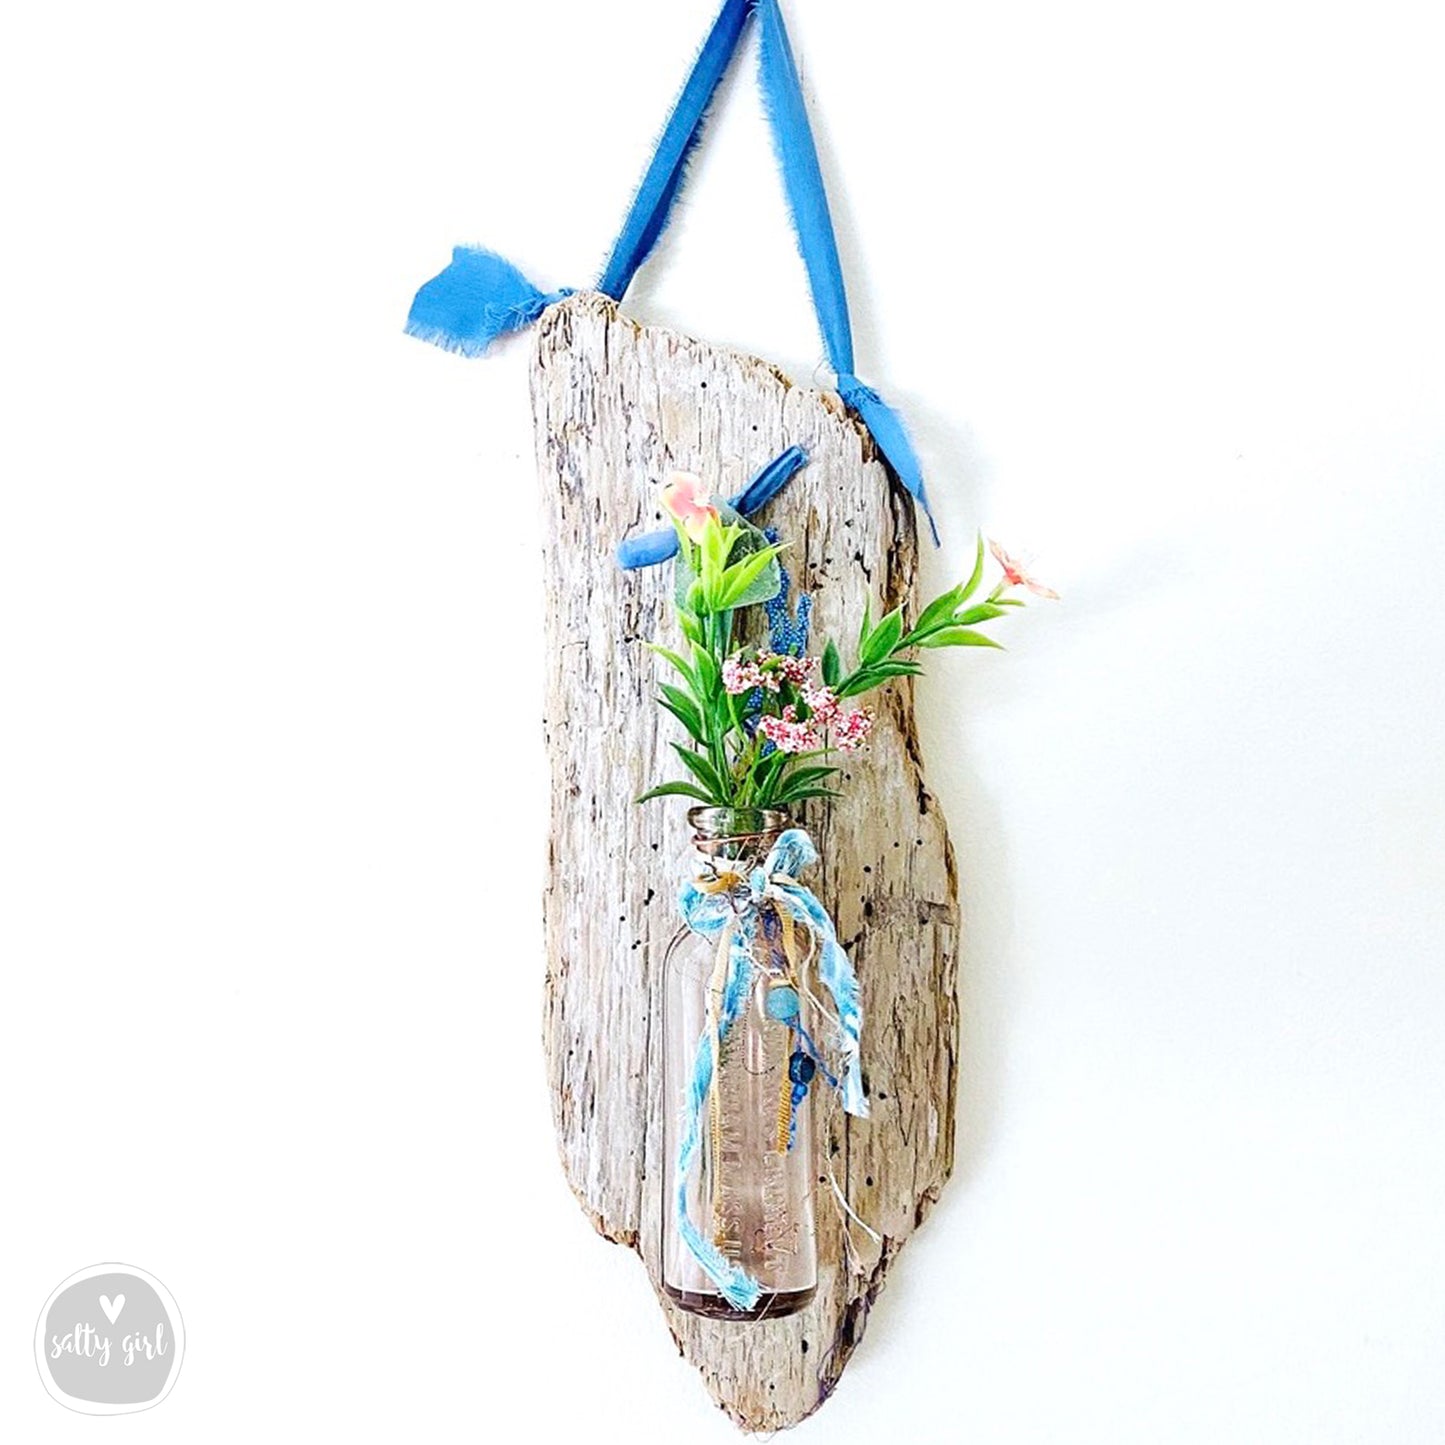 Driftwood Hanging Wall Vase with Antique Bottle and Sea Glass or Beach Stone Knob